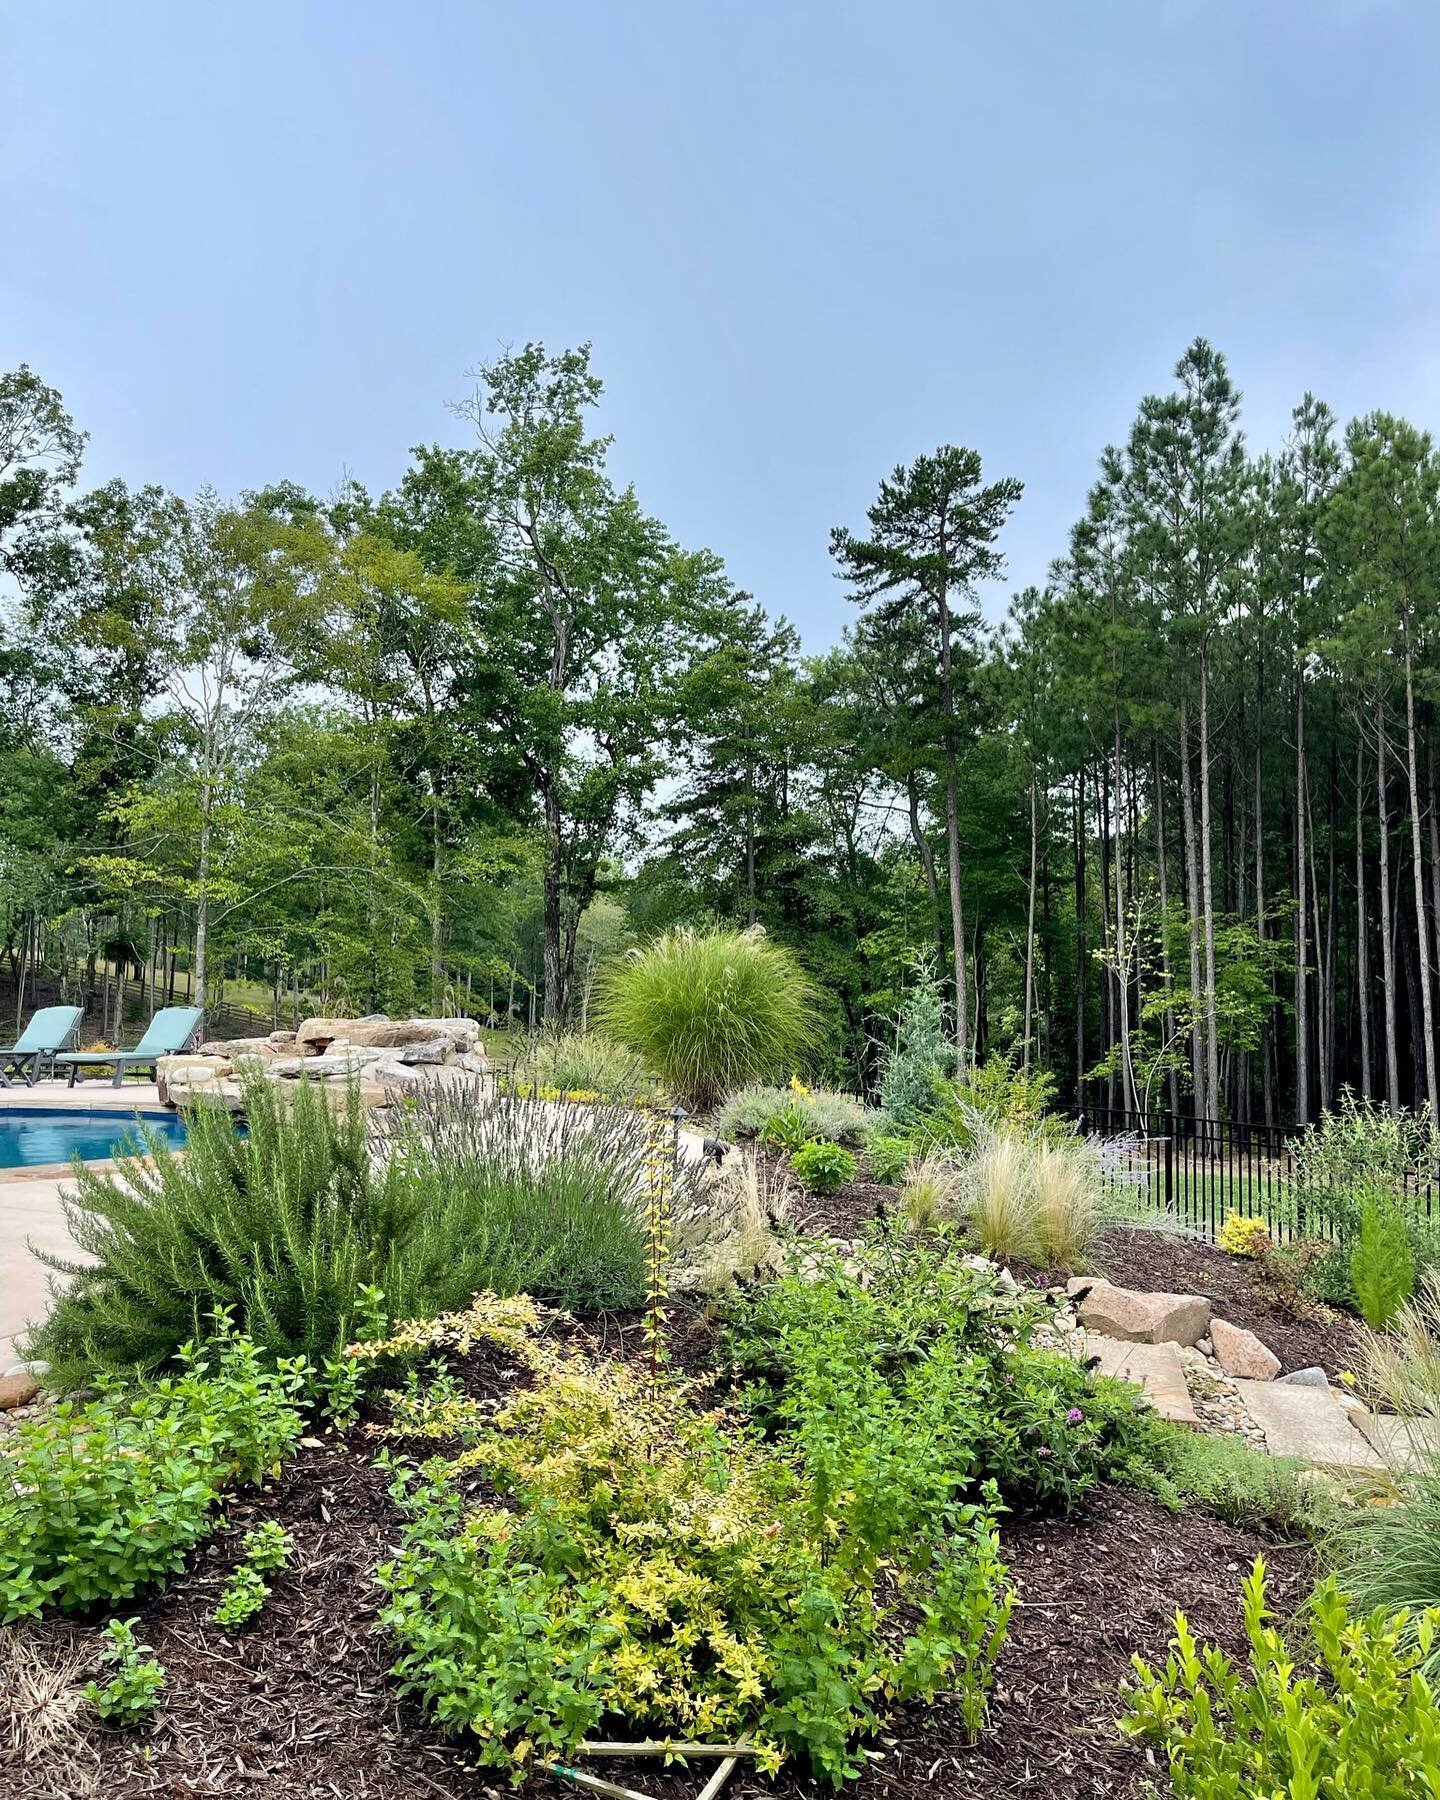 Friday photo dump 📸🪴☕️🐈🐈&zwj;⬛
Hope everyone has a great weekend!!

#digwhereyoulive #plantlocal #norwoodgardens #raleigh #raleighplants #raleighcoffee #raleighhomes #raleighlandscapedesign #raleighhardscape #gardenandmarket